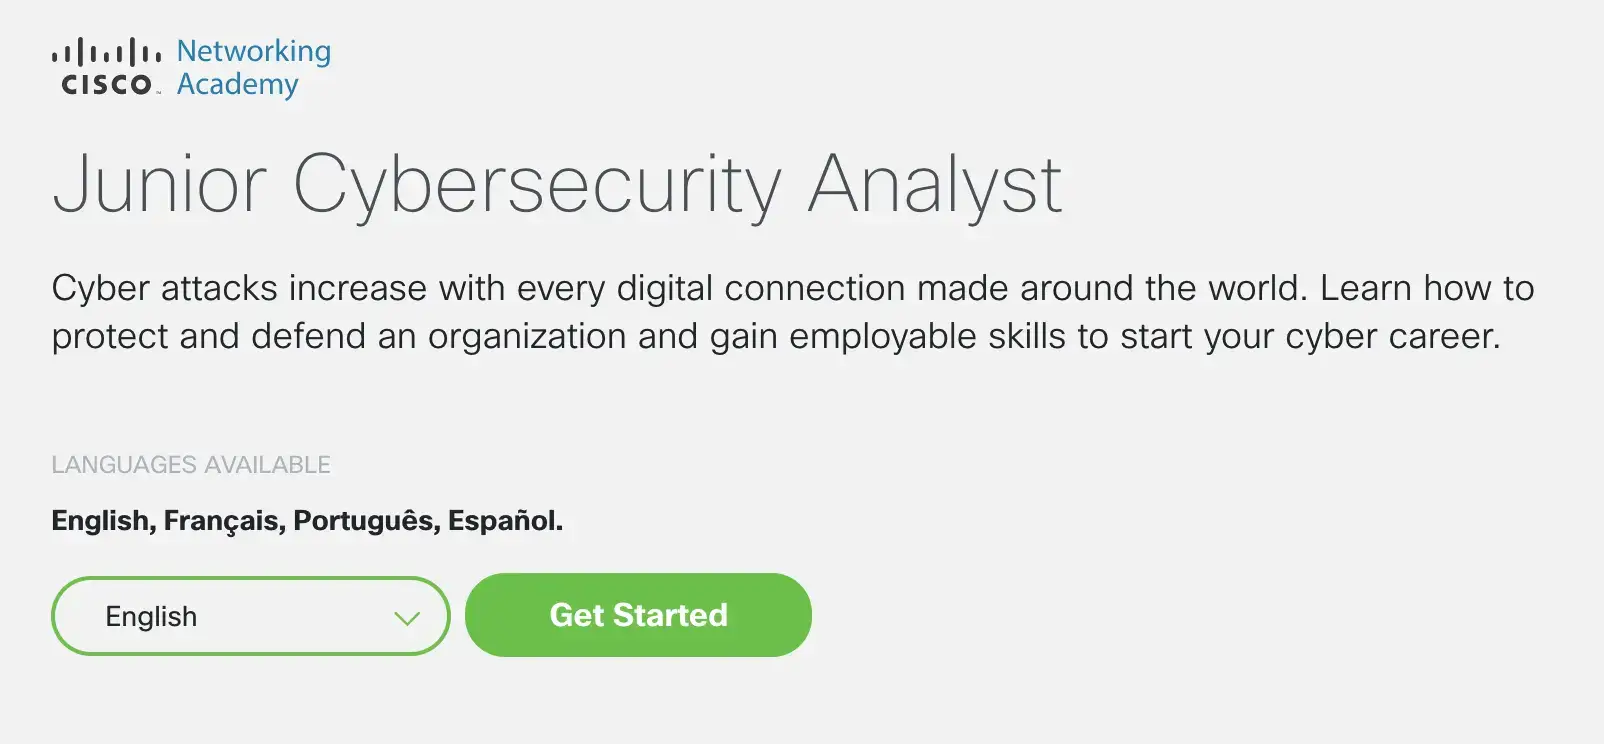 Aimer Sherdan Ong on LinkedIn: Junior Cybersecurity Analyst Career Path was  issued by Cisco to Aimer…